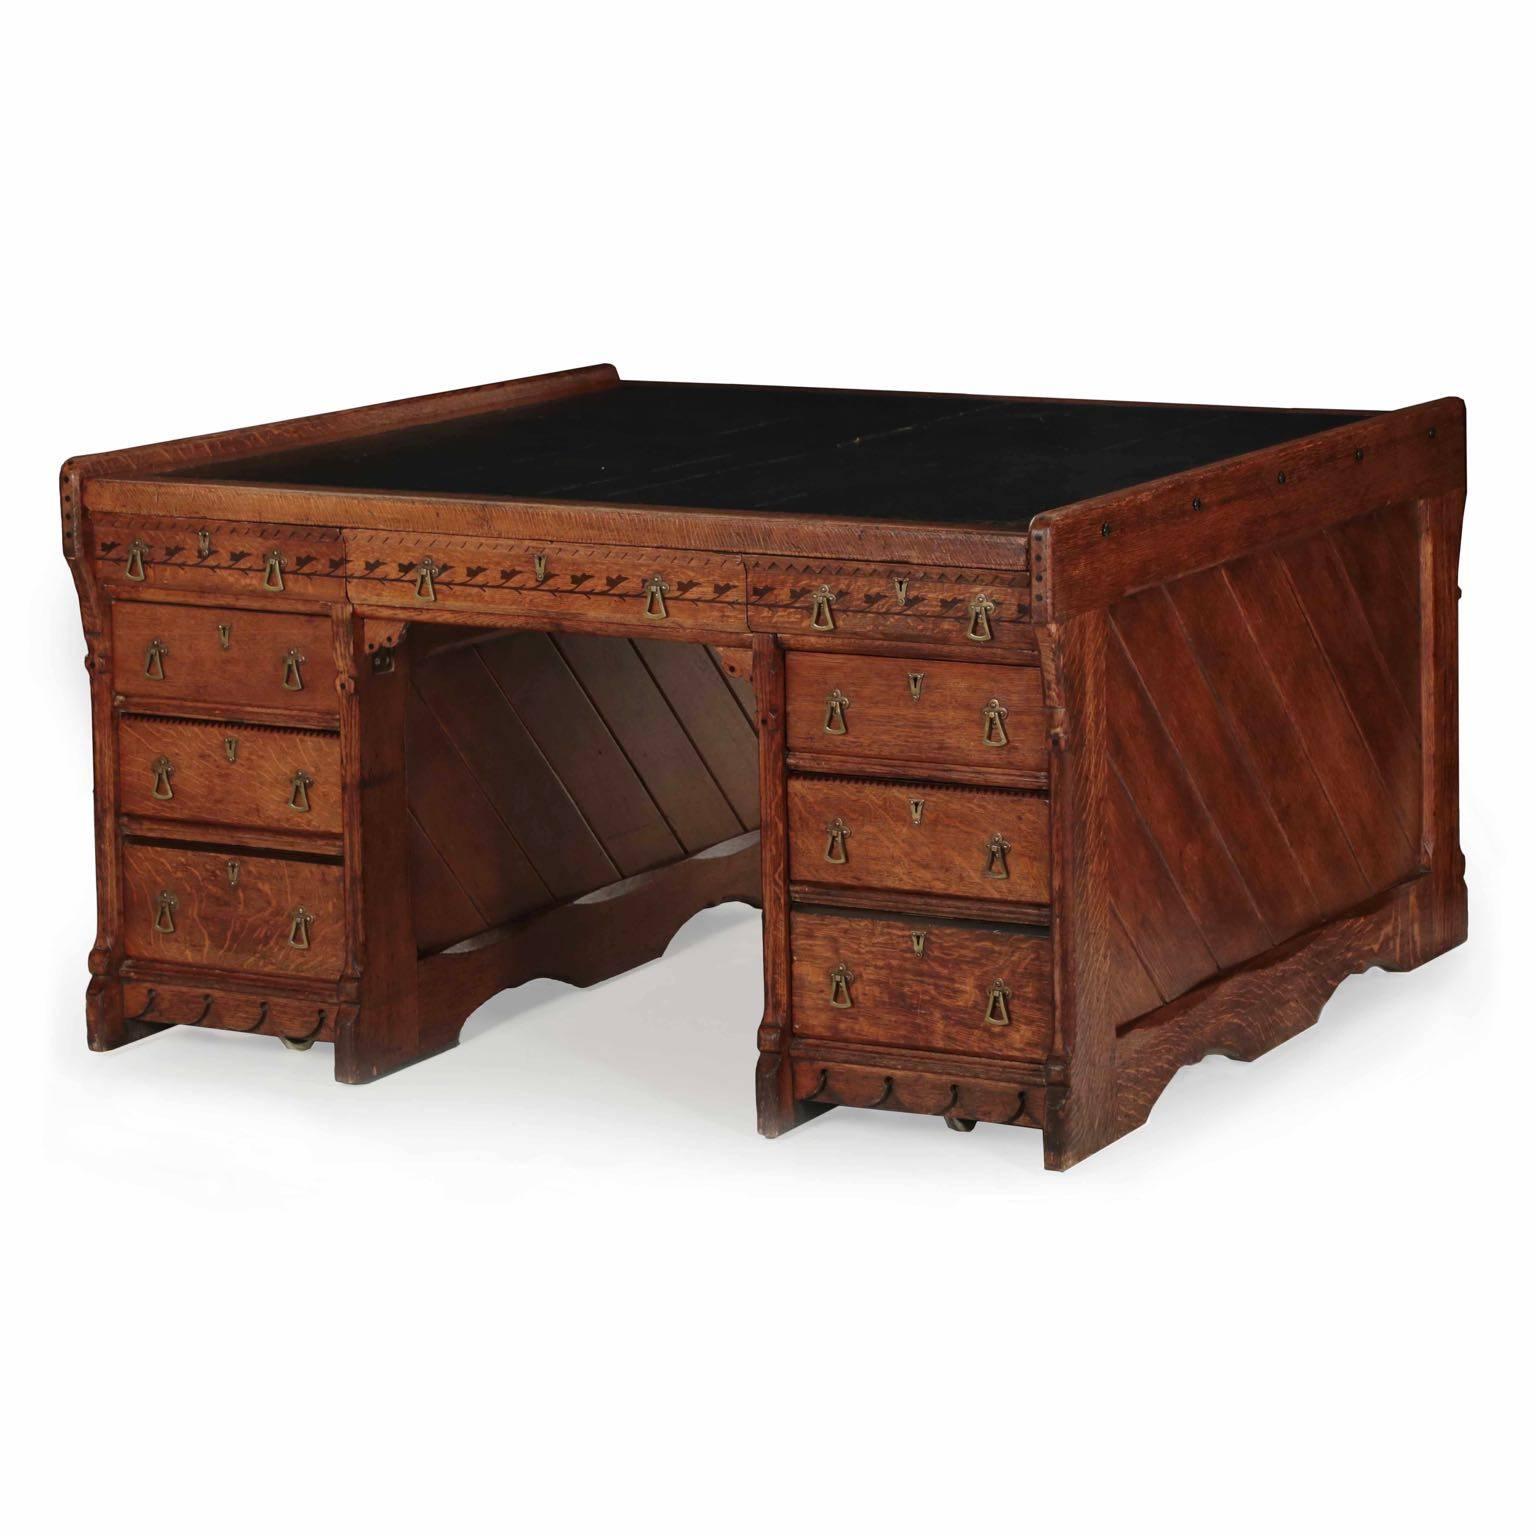 Arts and Crafts English Arts & Crafts Oak and Leather Partners Writing Desk, circa 1870-1890